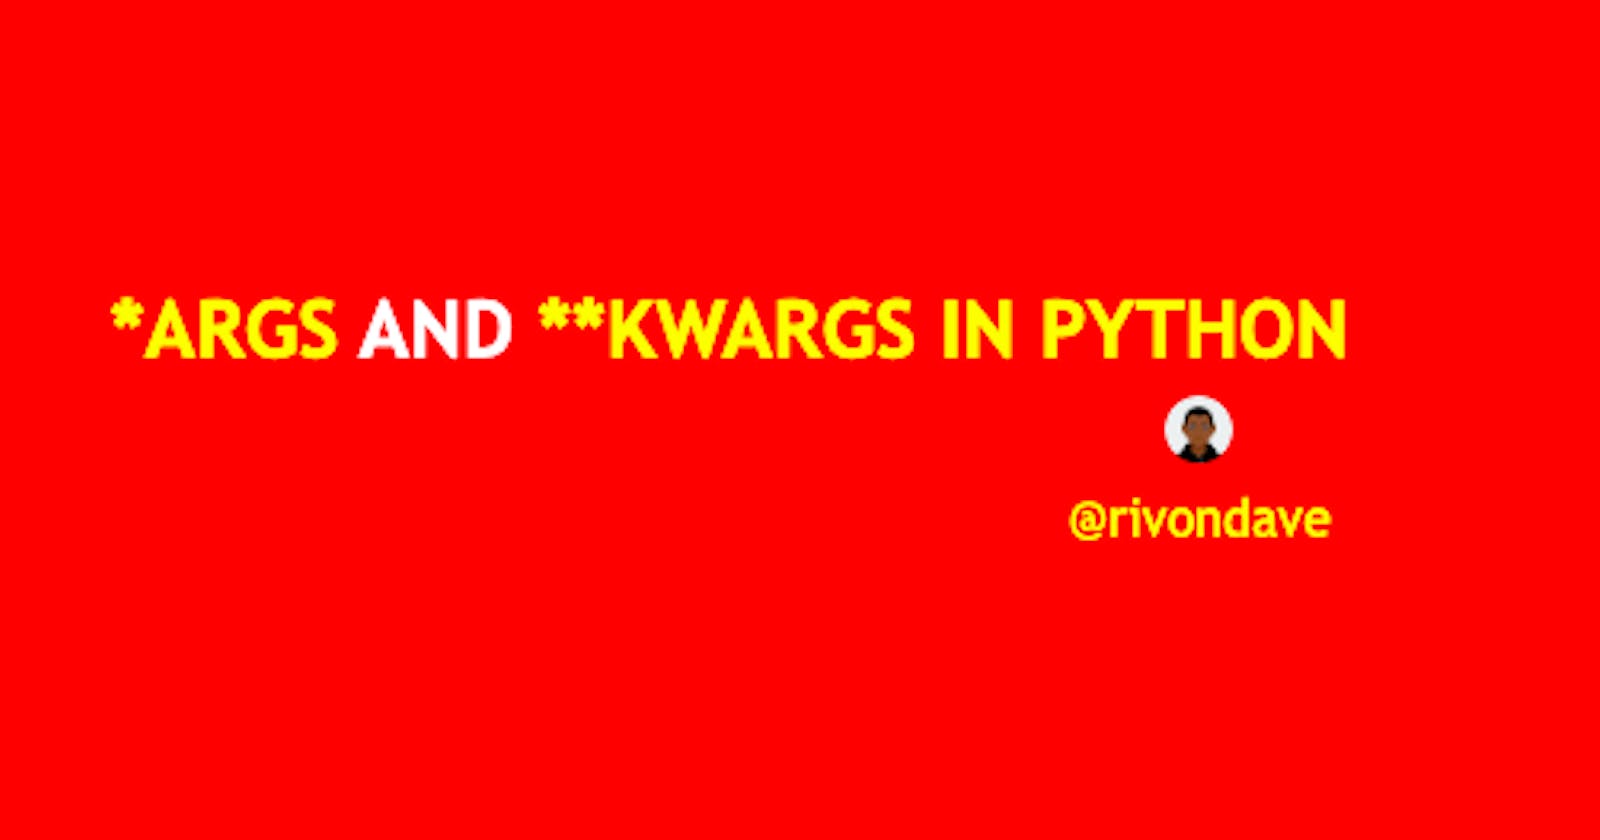 *args and **kwargs in python